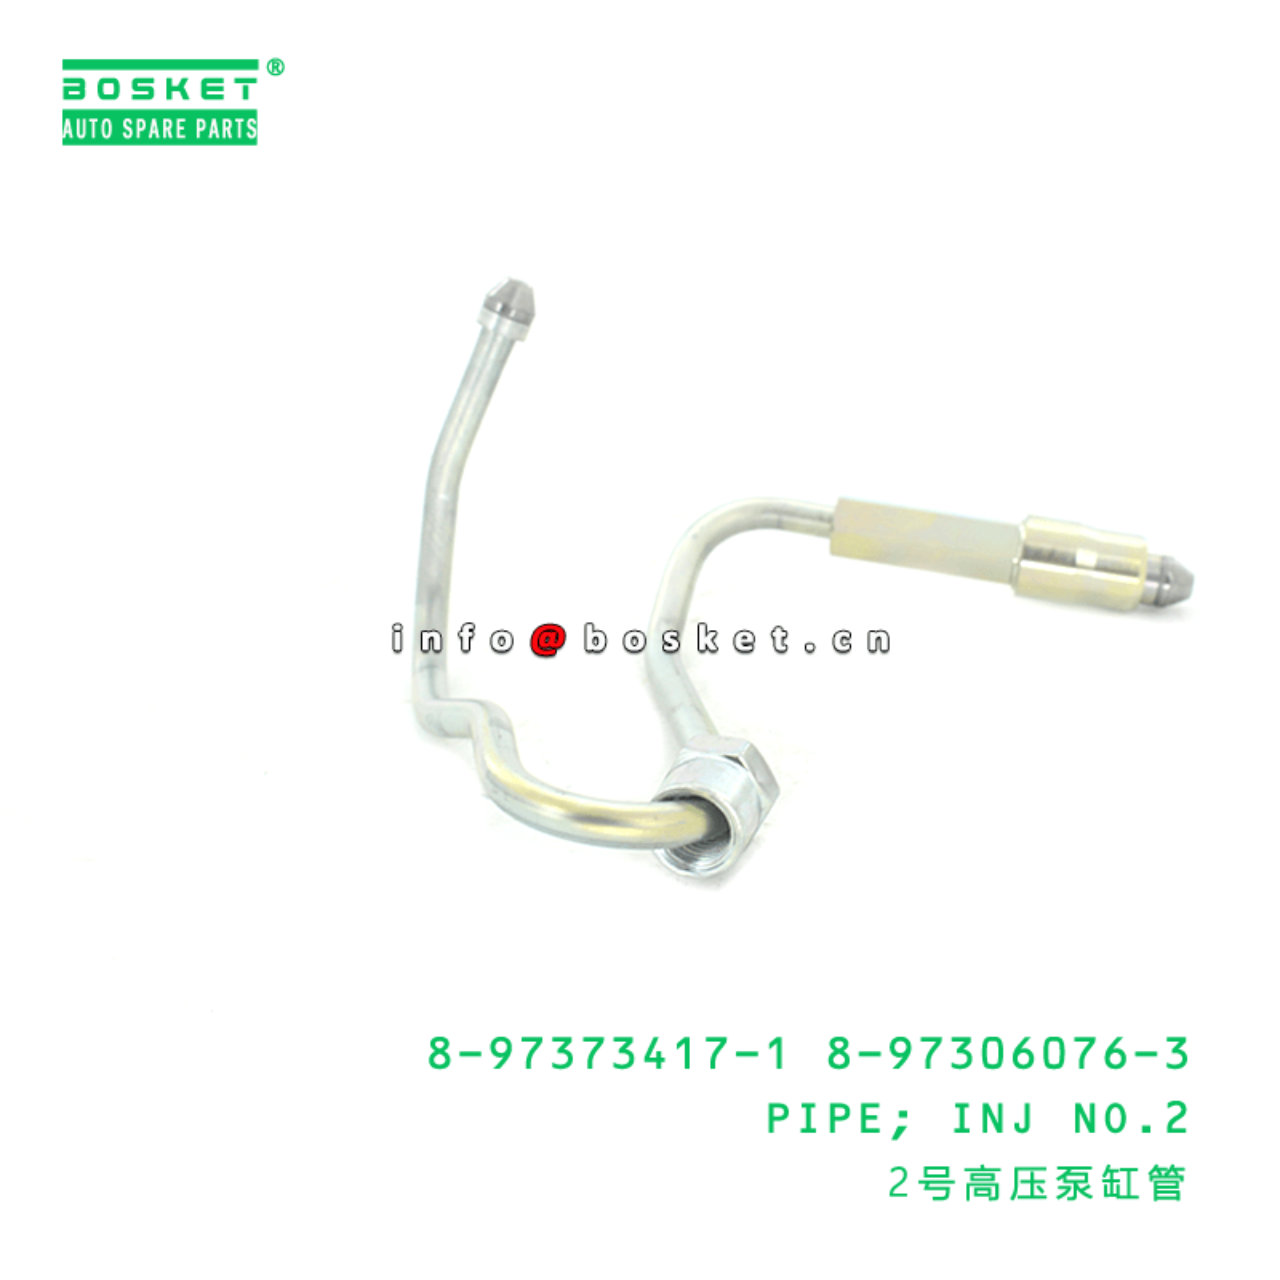 8-97373417-1 8-97306076-3 Injection No.2 Pipe 8973734171 8973060763 Suitable for ISUZU NPR 4HK1